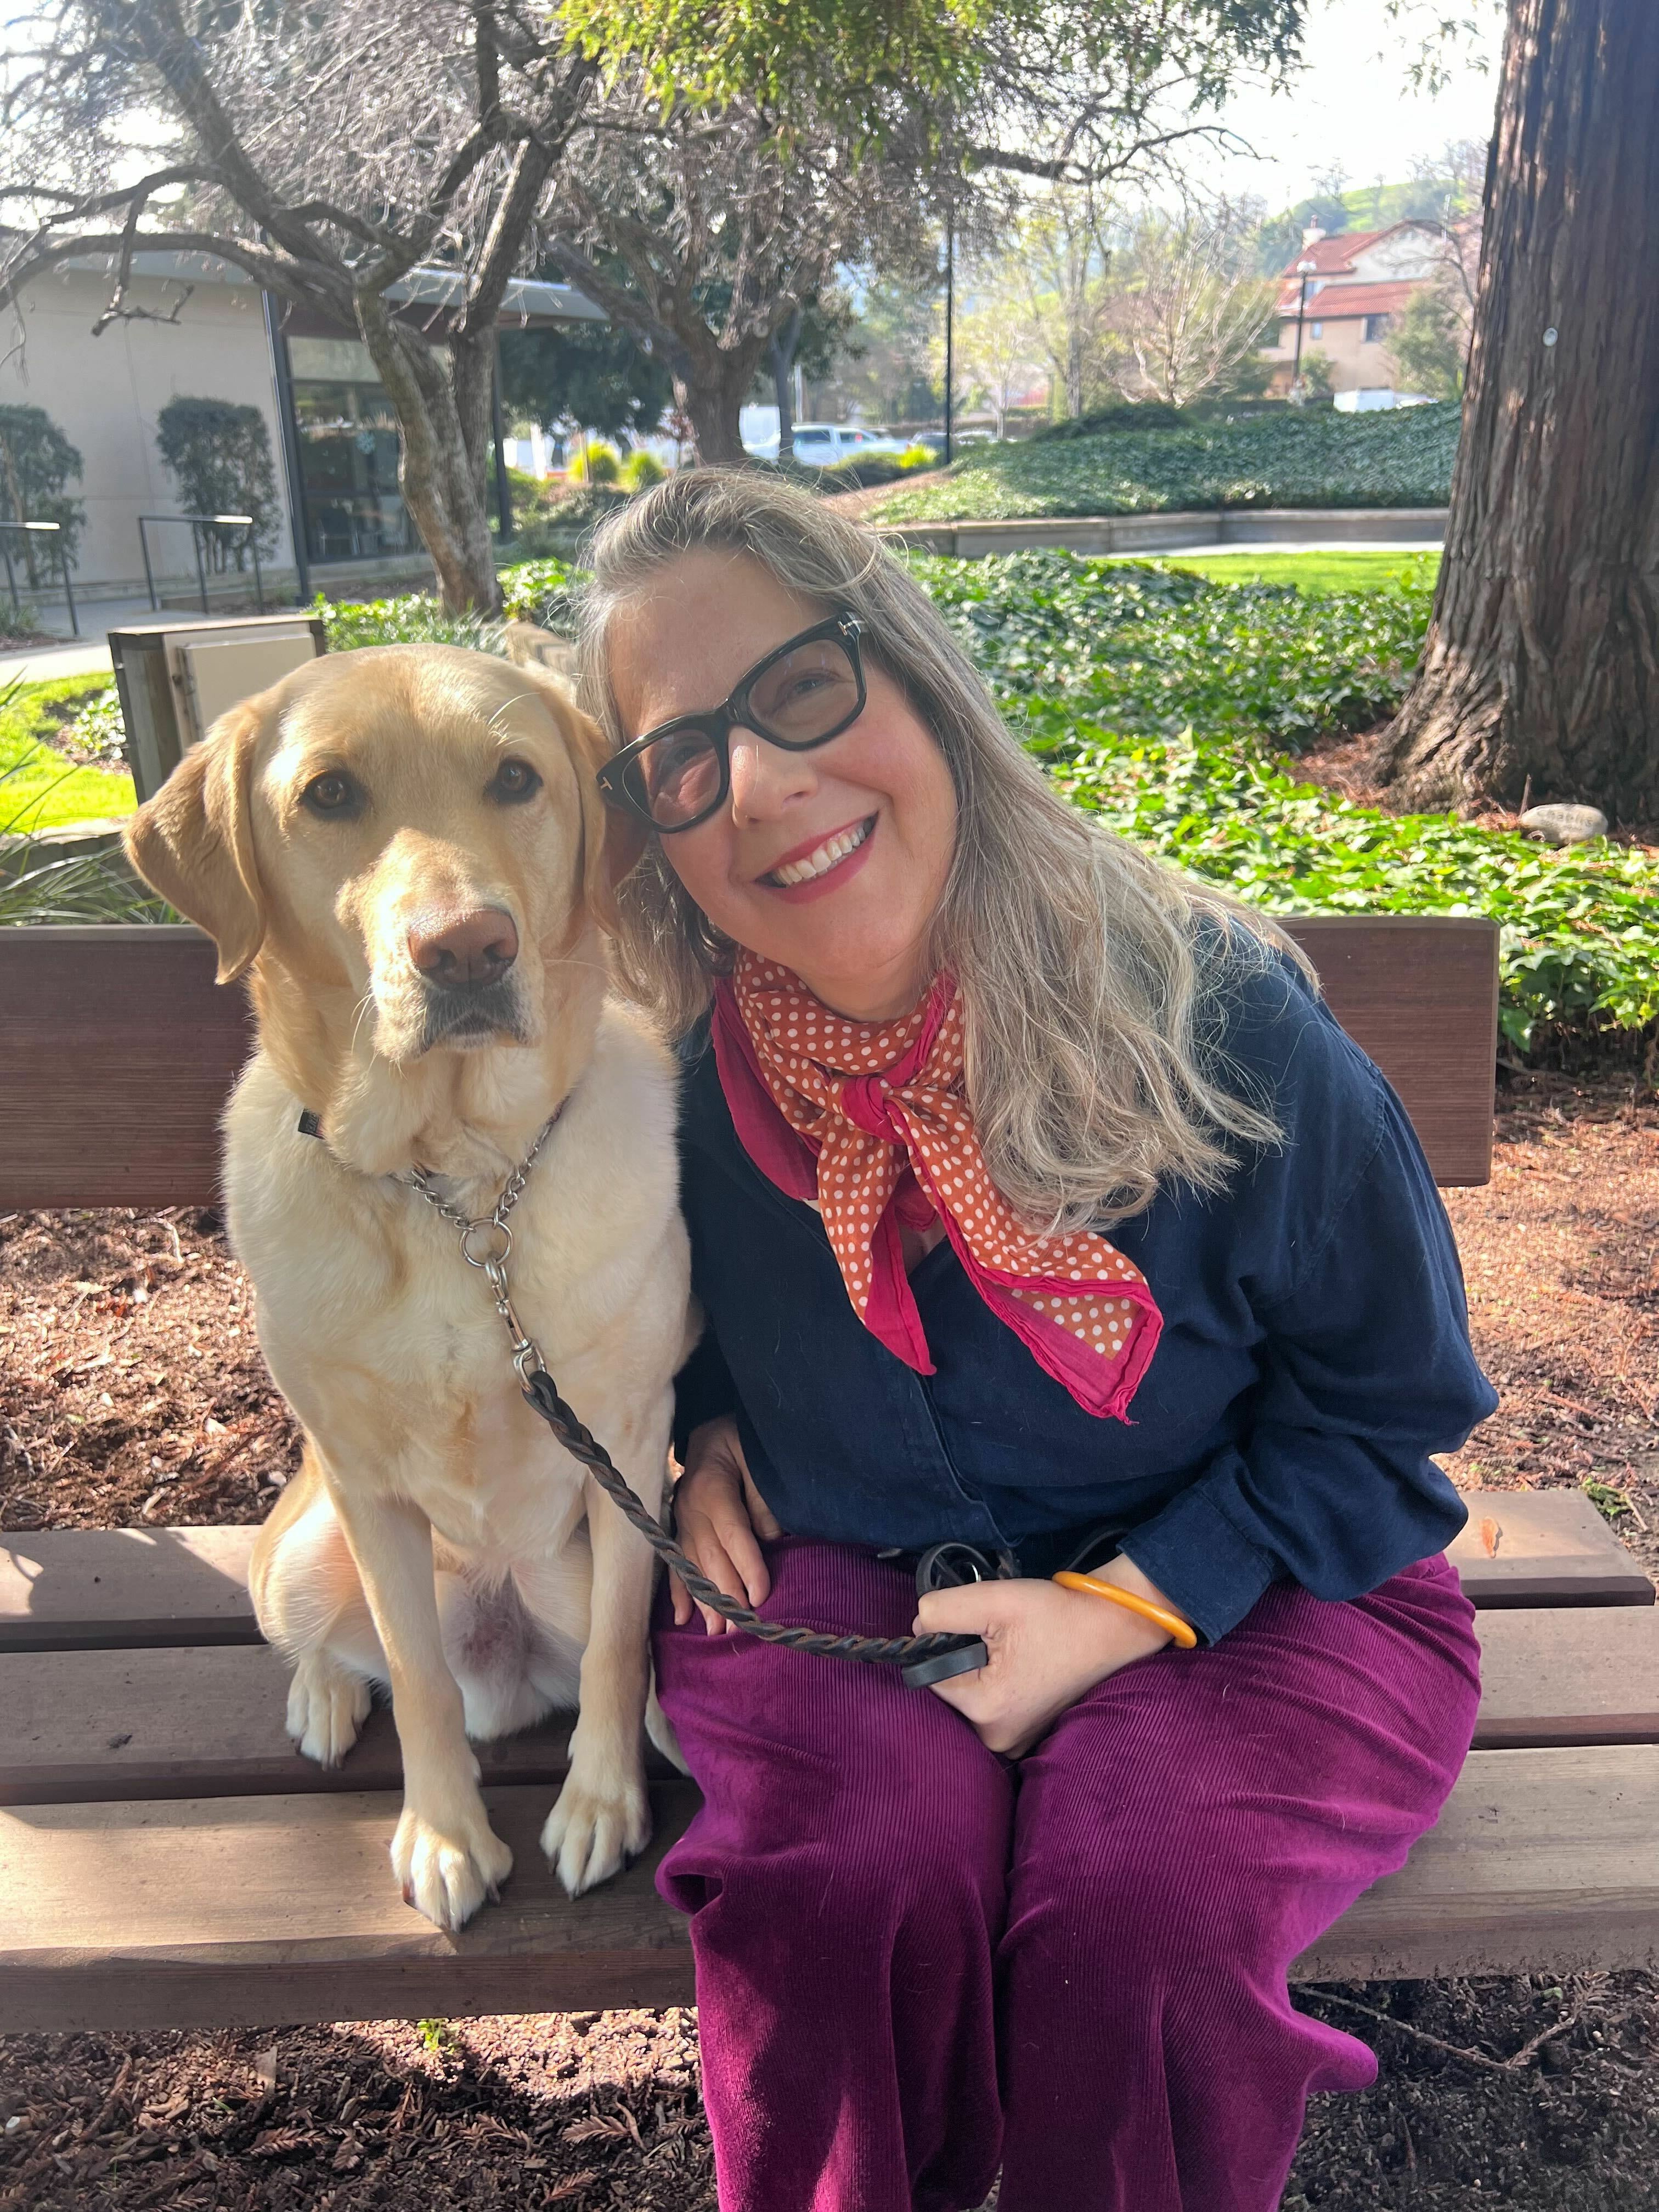 Lynn sits beside a yellow Lab on a bench under a shady tree. She has a brightly colored scarf around her neck and smiles at the camera while leaning her head into the dog's.